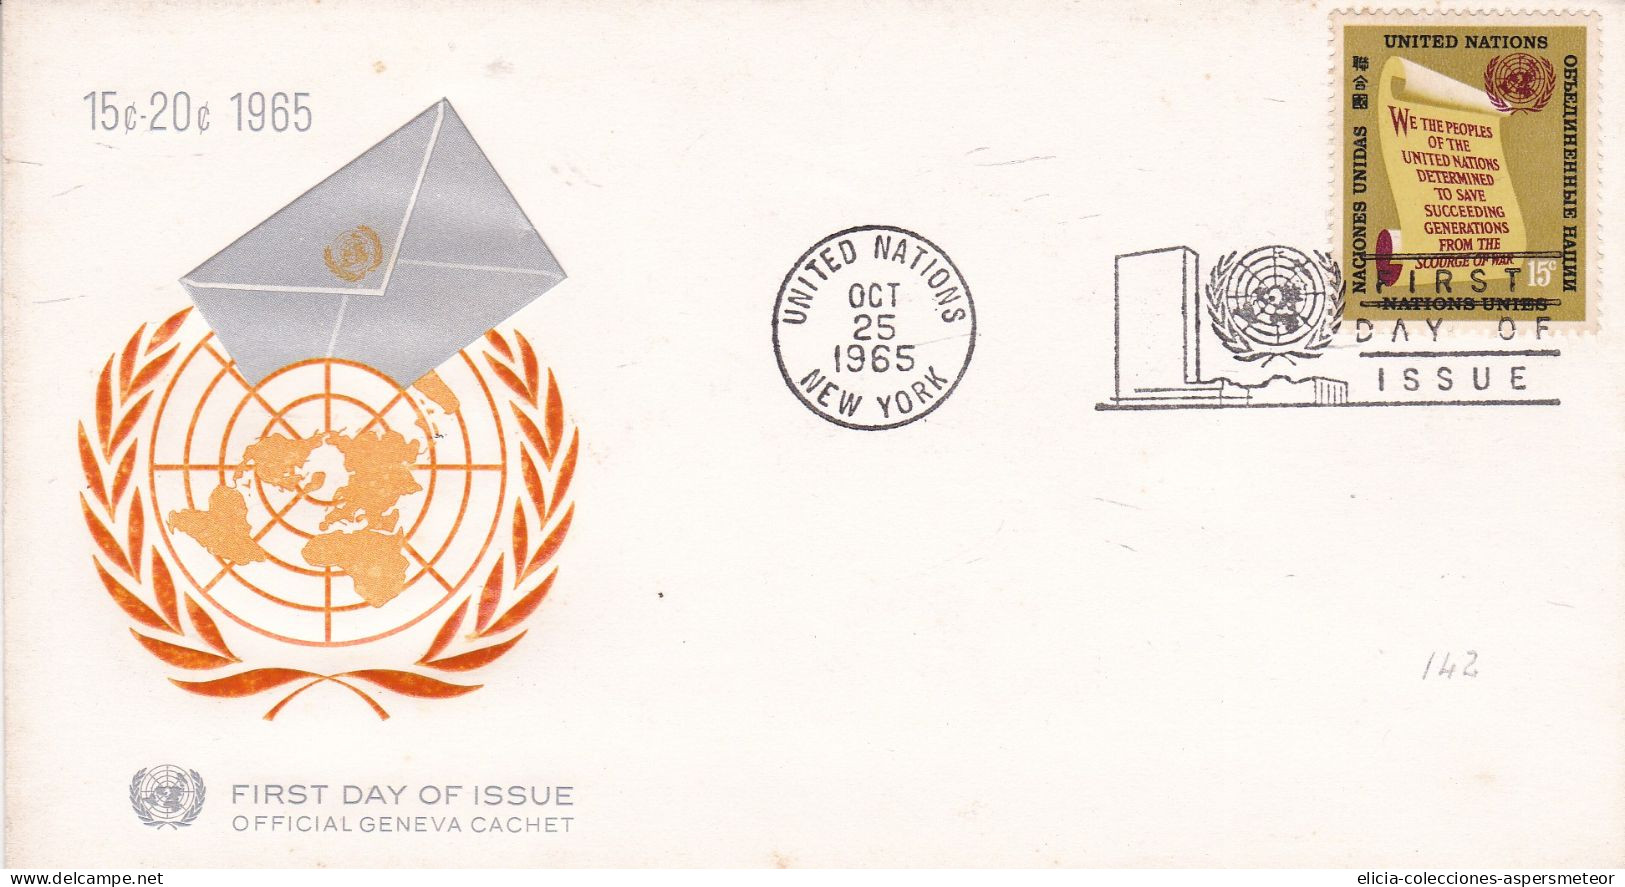 USA - 1965 - FDC - Nations Unies - United Nations Postmark - Official Geneva Cachet - Caja 30 - 1961-1970